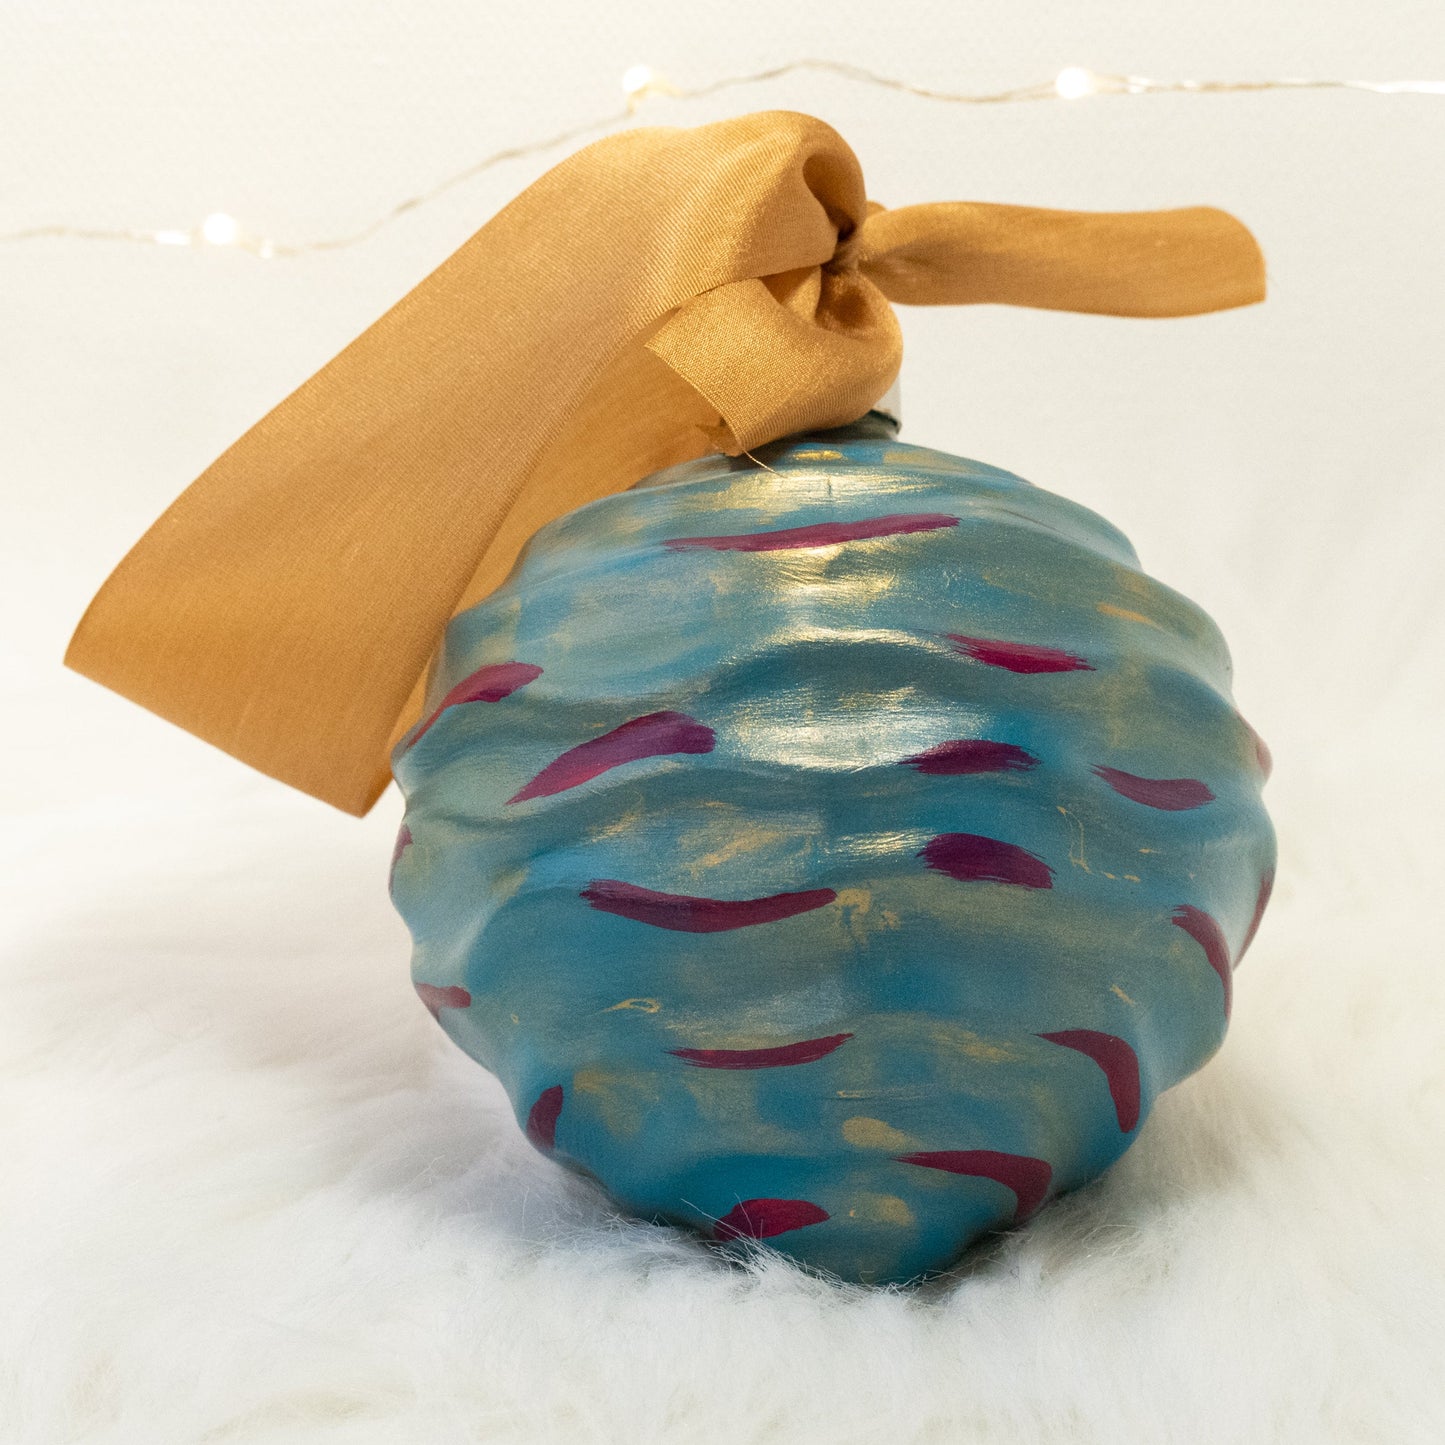 The Stella Hand Painted Ornament features a turquoise blue base coat beneath a transparent gold layer with deep magenta and gold accents. Painted using fluid acrylic and acrylic paints. Displayed on white faux fur with fairy lights in the background.